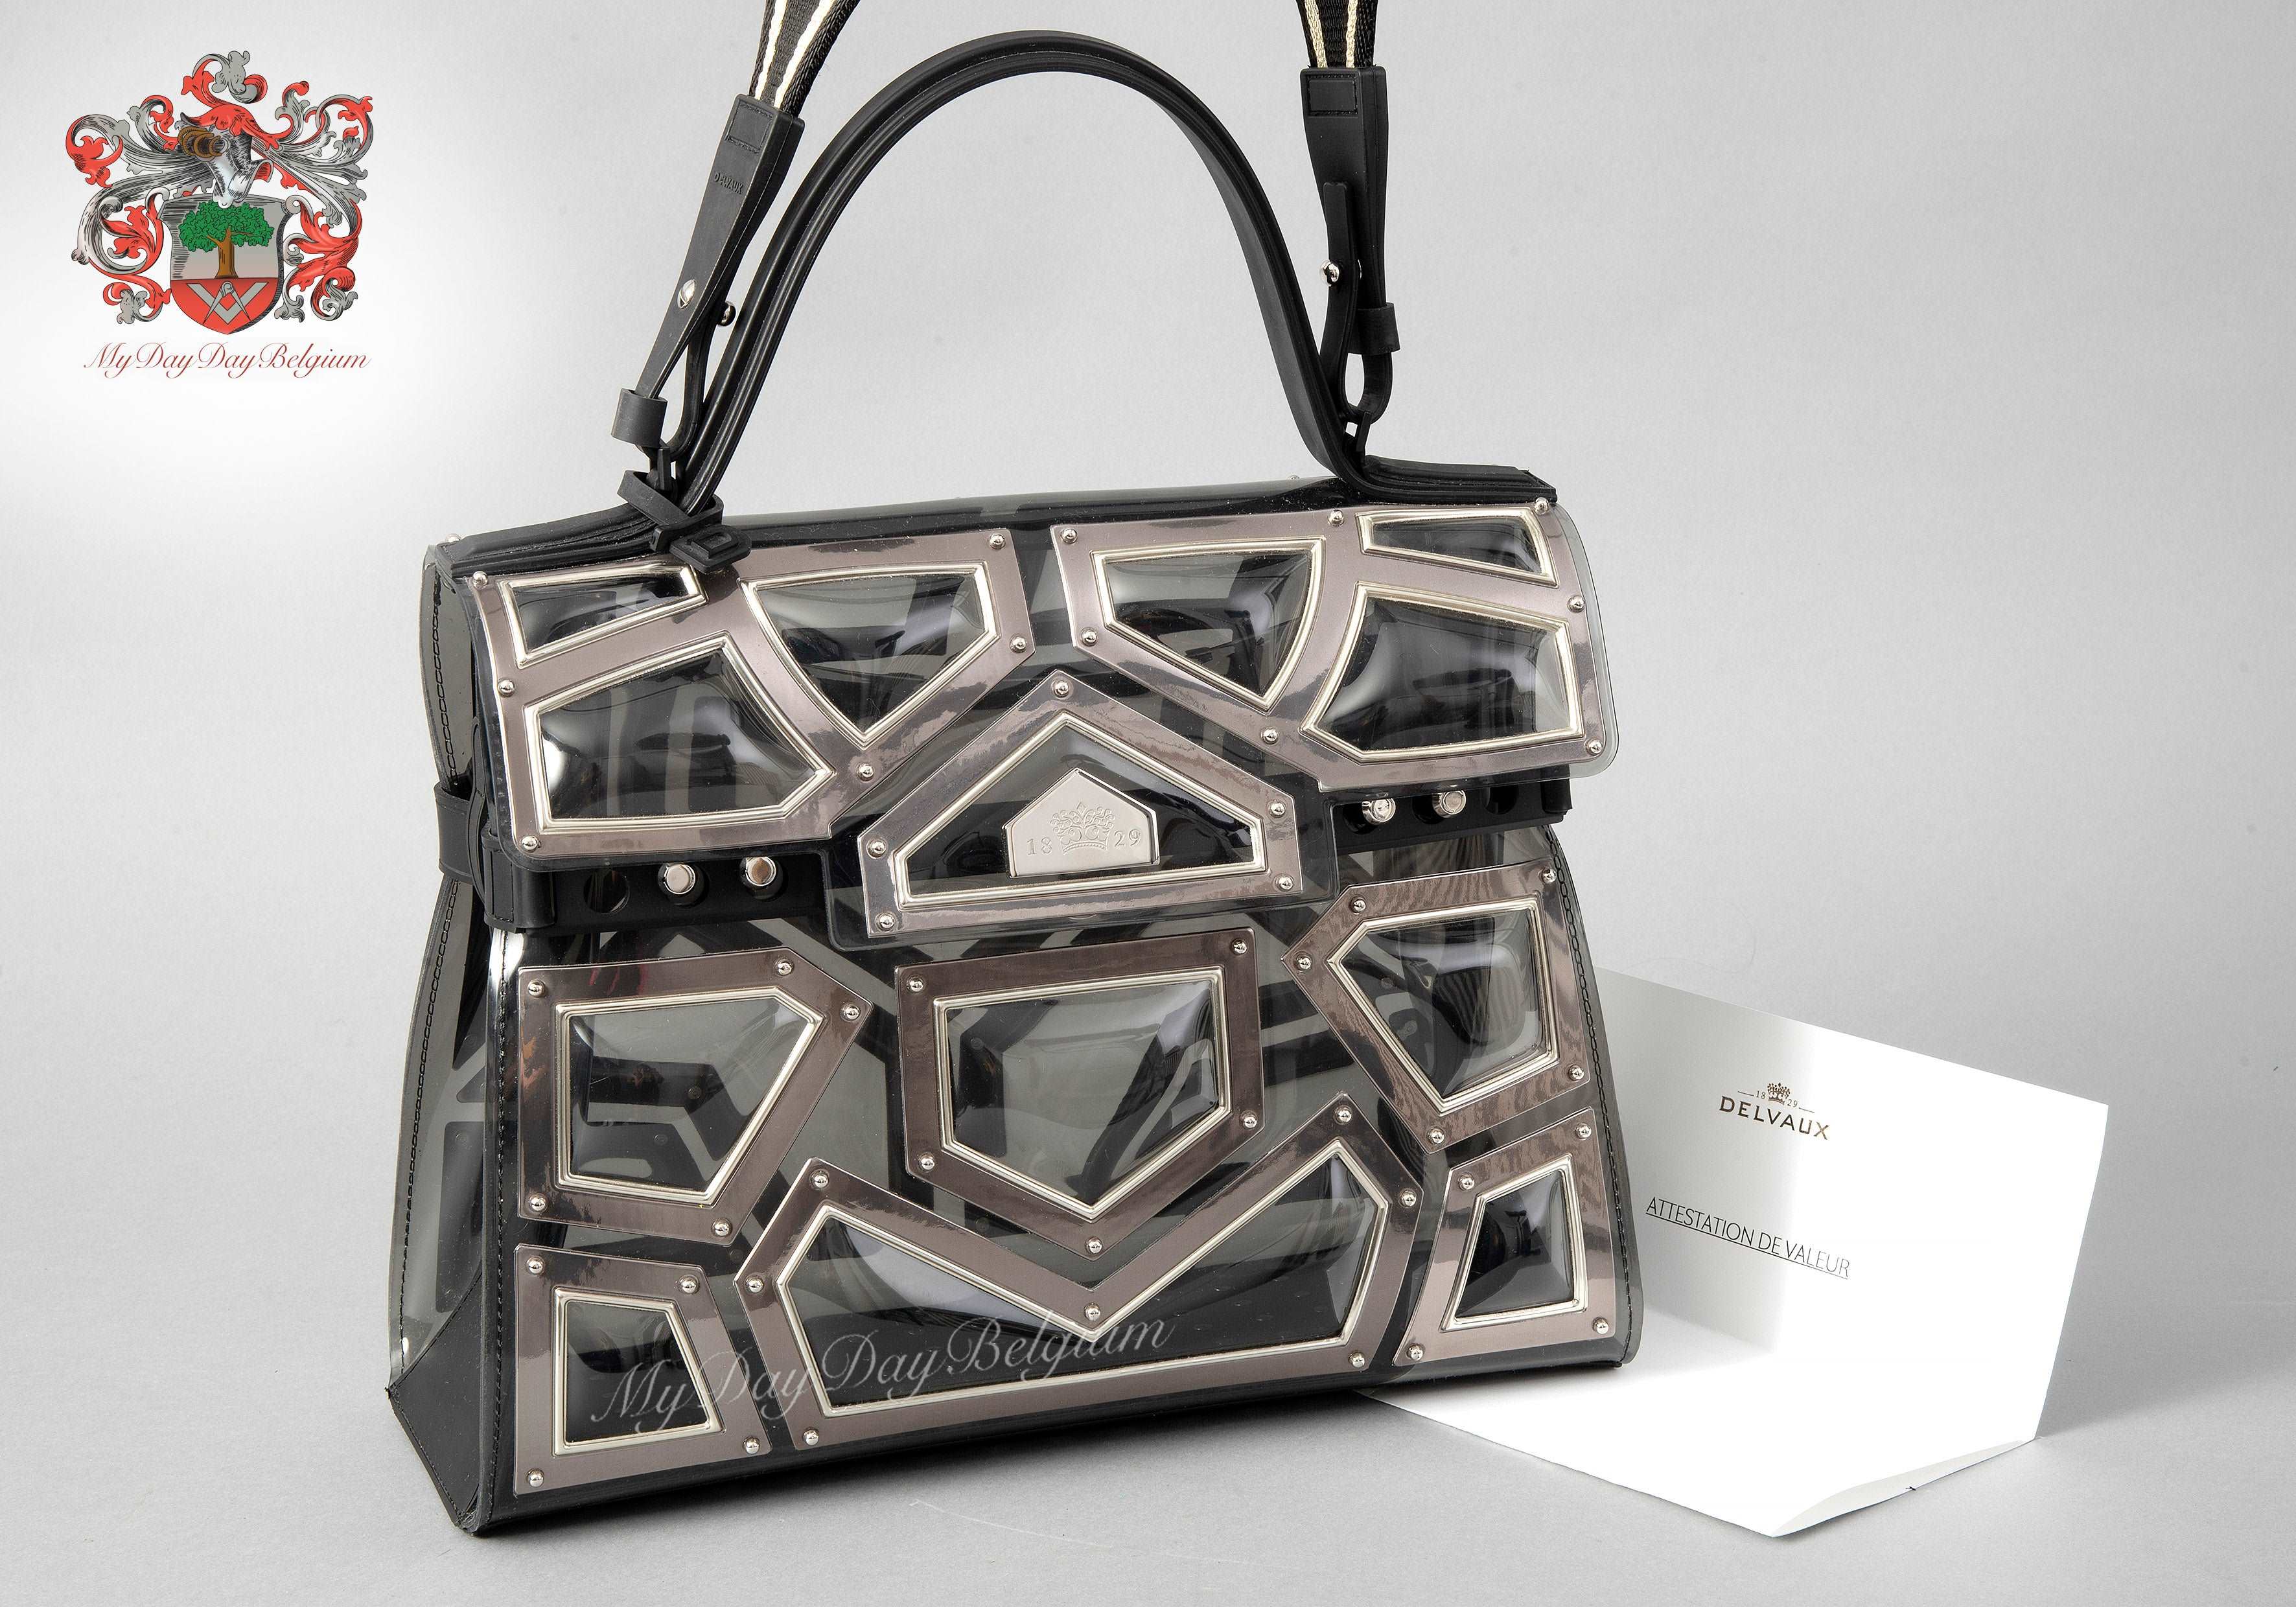 Delvaux On Sale - Authenticated Resale